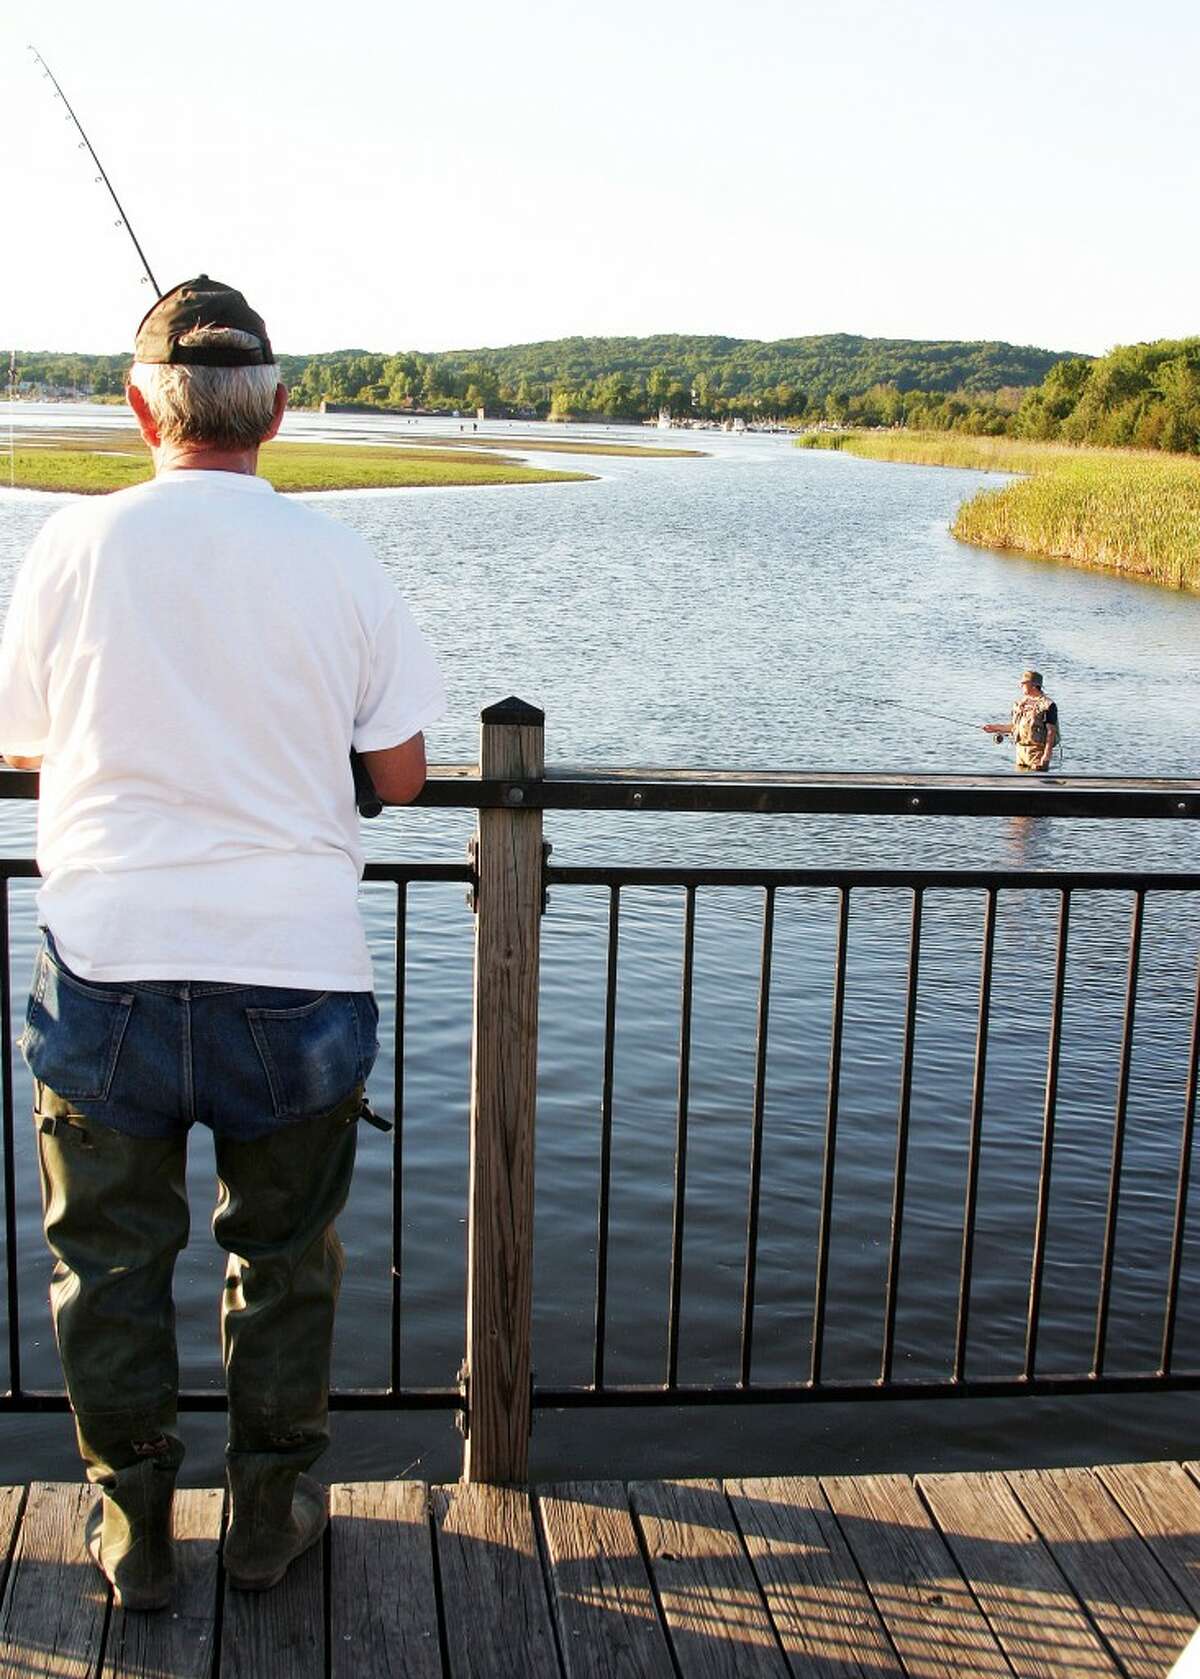 MOVING IN FOR THE FISH: DNR wants anglers to stay out of the east end of Betsie Bay so fish go move up river. Right now, the water level is too low and fish are being spooked by people, according to DNR. The water level Saturday was 577.5 feet. The record low in 1964 was 576.05 feet.